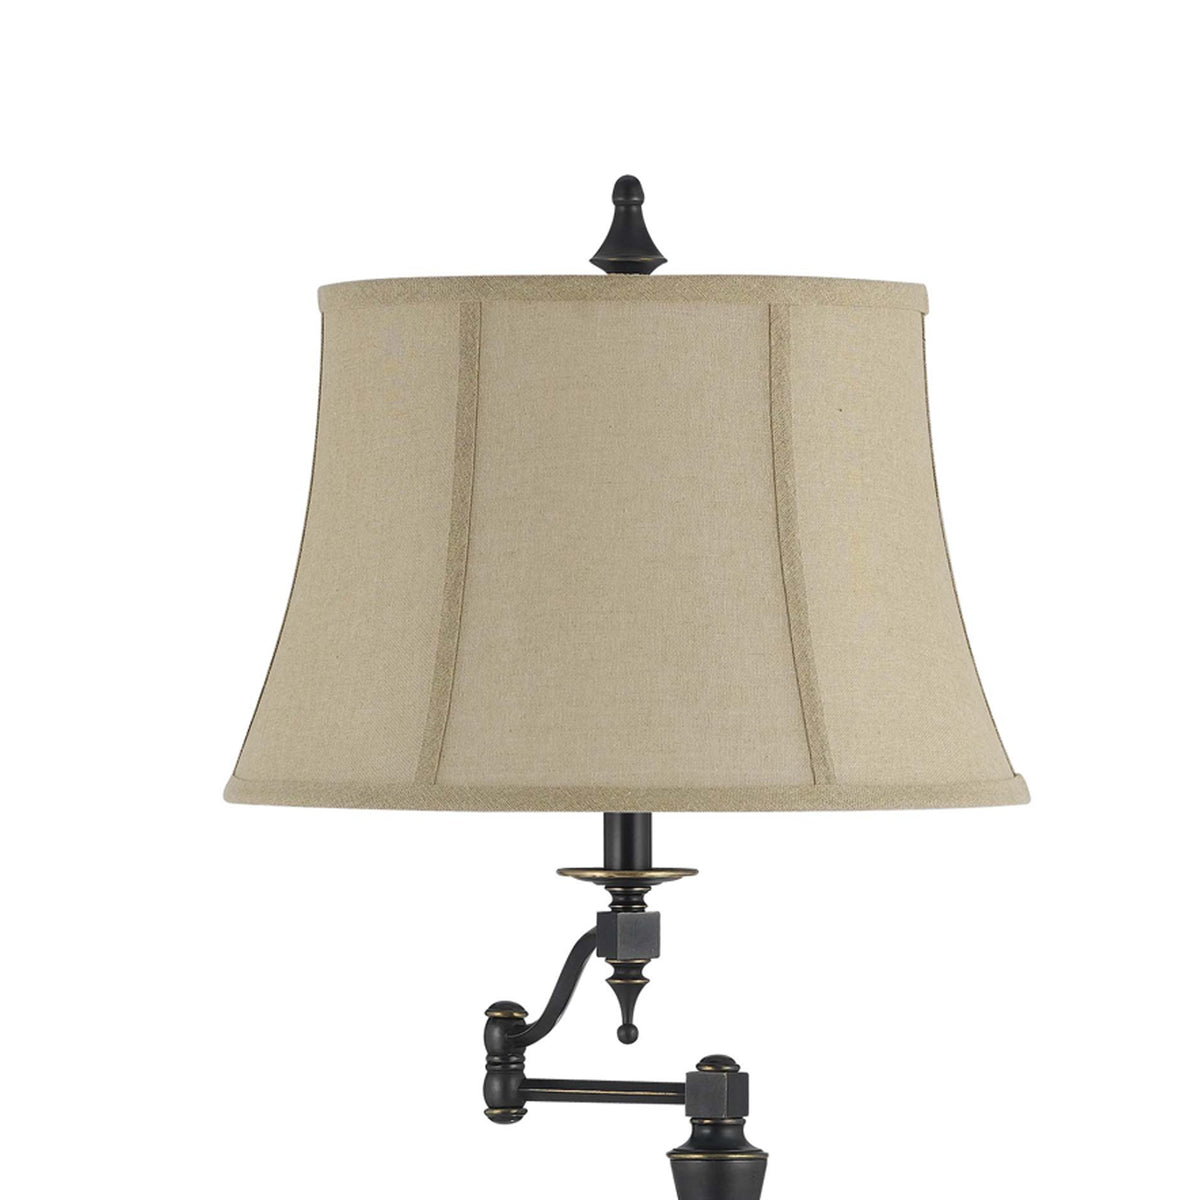 Metal Body Floor Lamp with Fabric Tapered Bell Shade, Beige and Black - BM223599